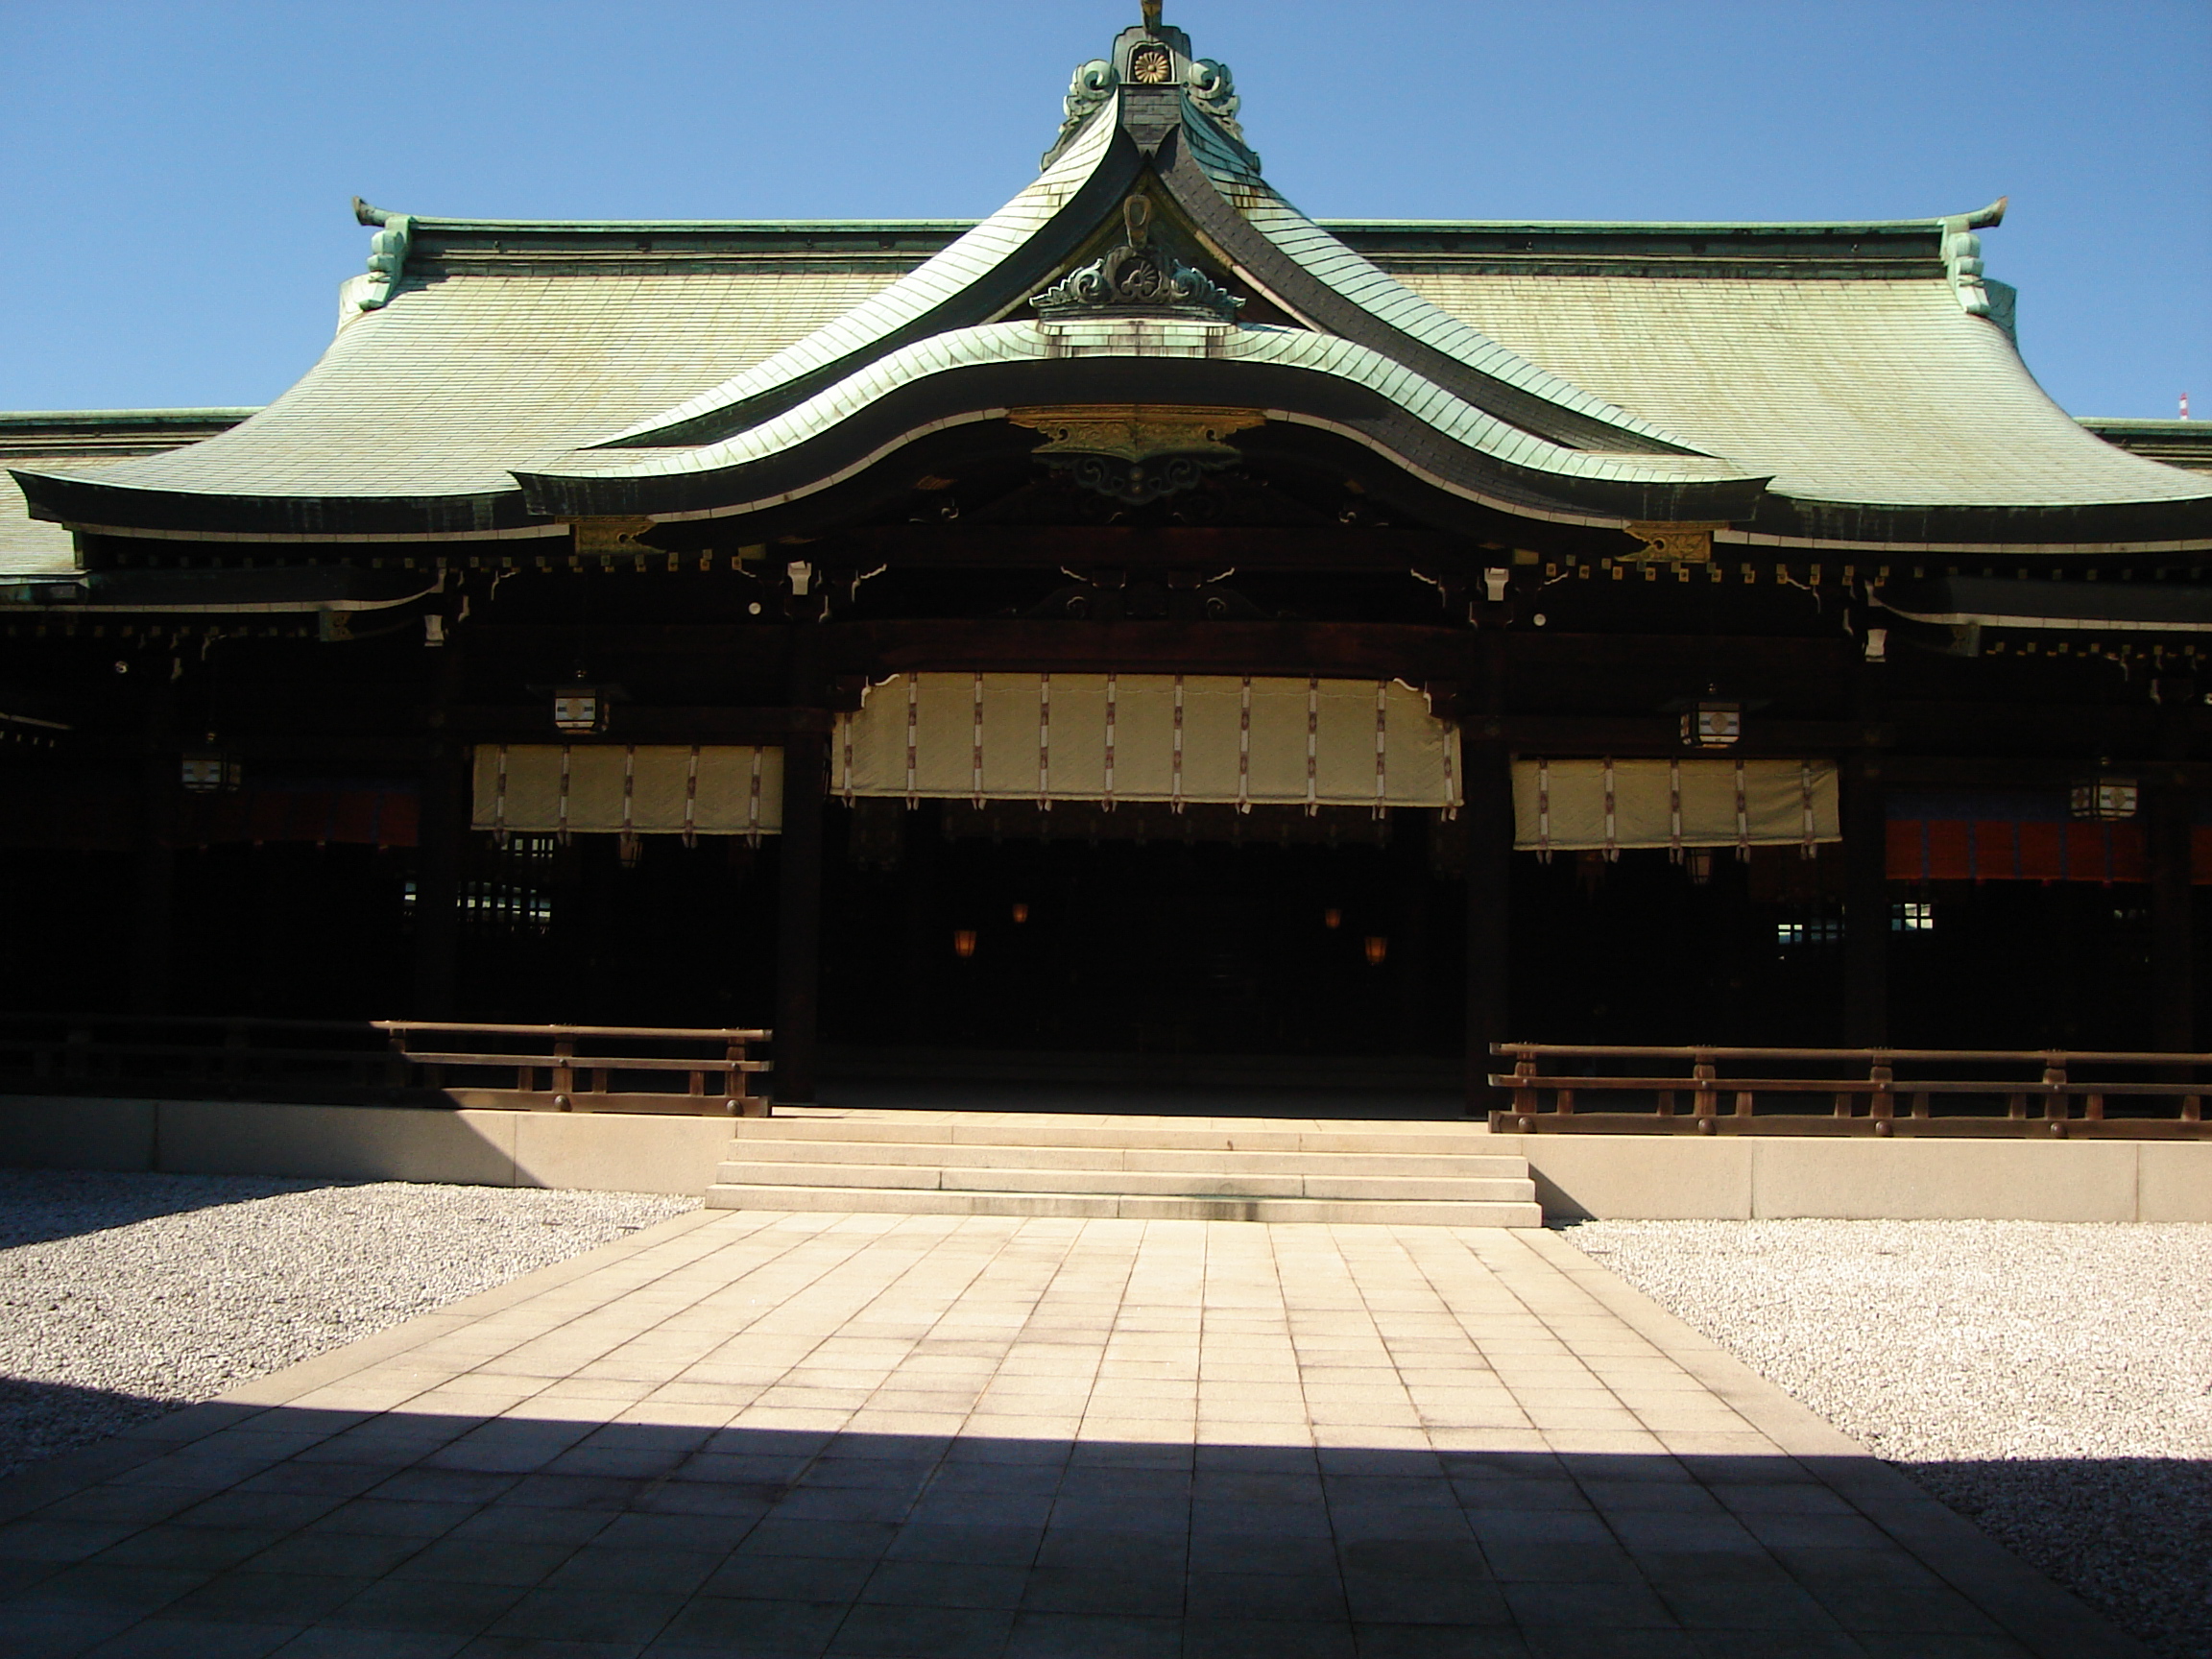 the main shrine building with the blinds open